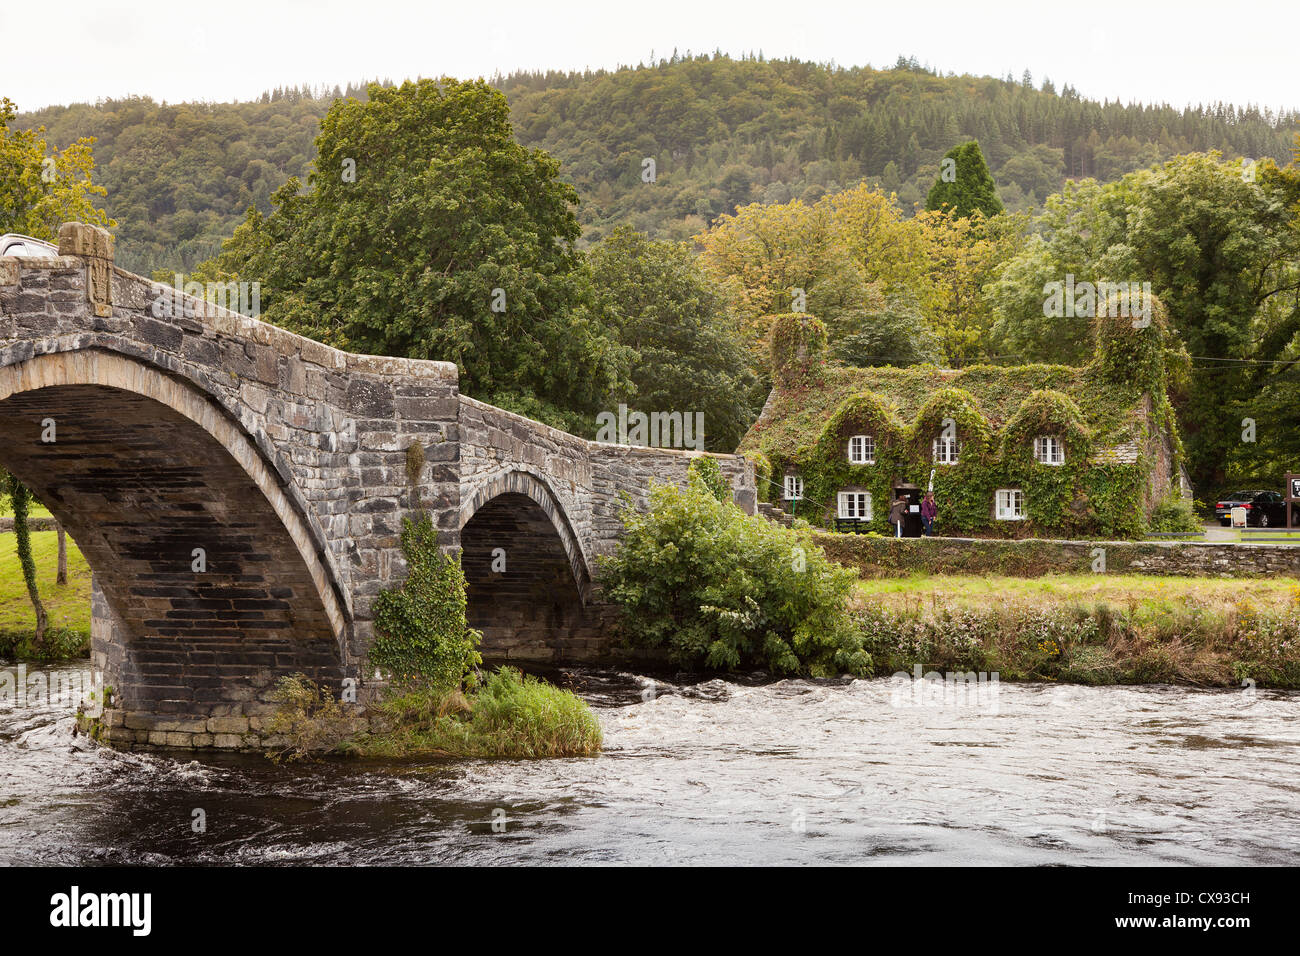 The three-arch stone bridge, Pont Fawr, in Llanrwst, Wales. Tu Hwnt i'r Bont in the background. The river Conwy passes under. Stock Photo